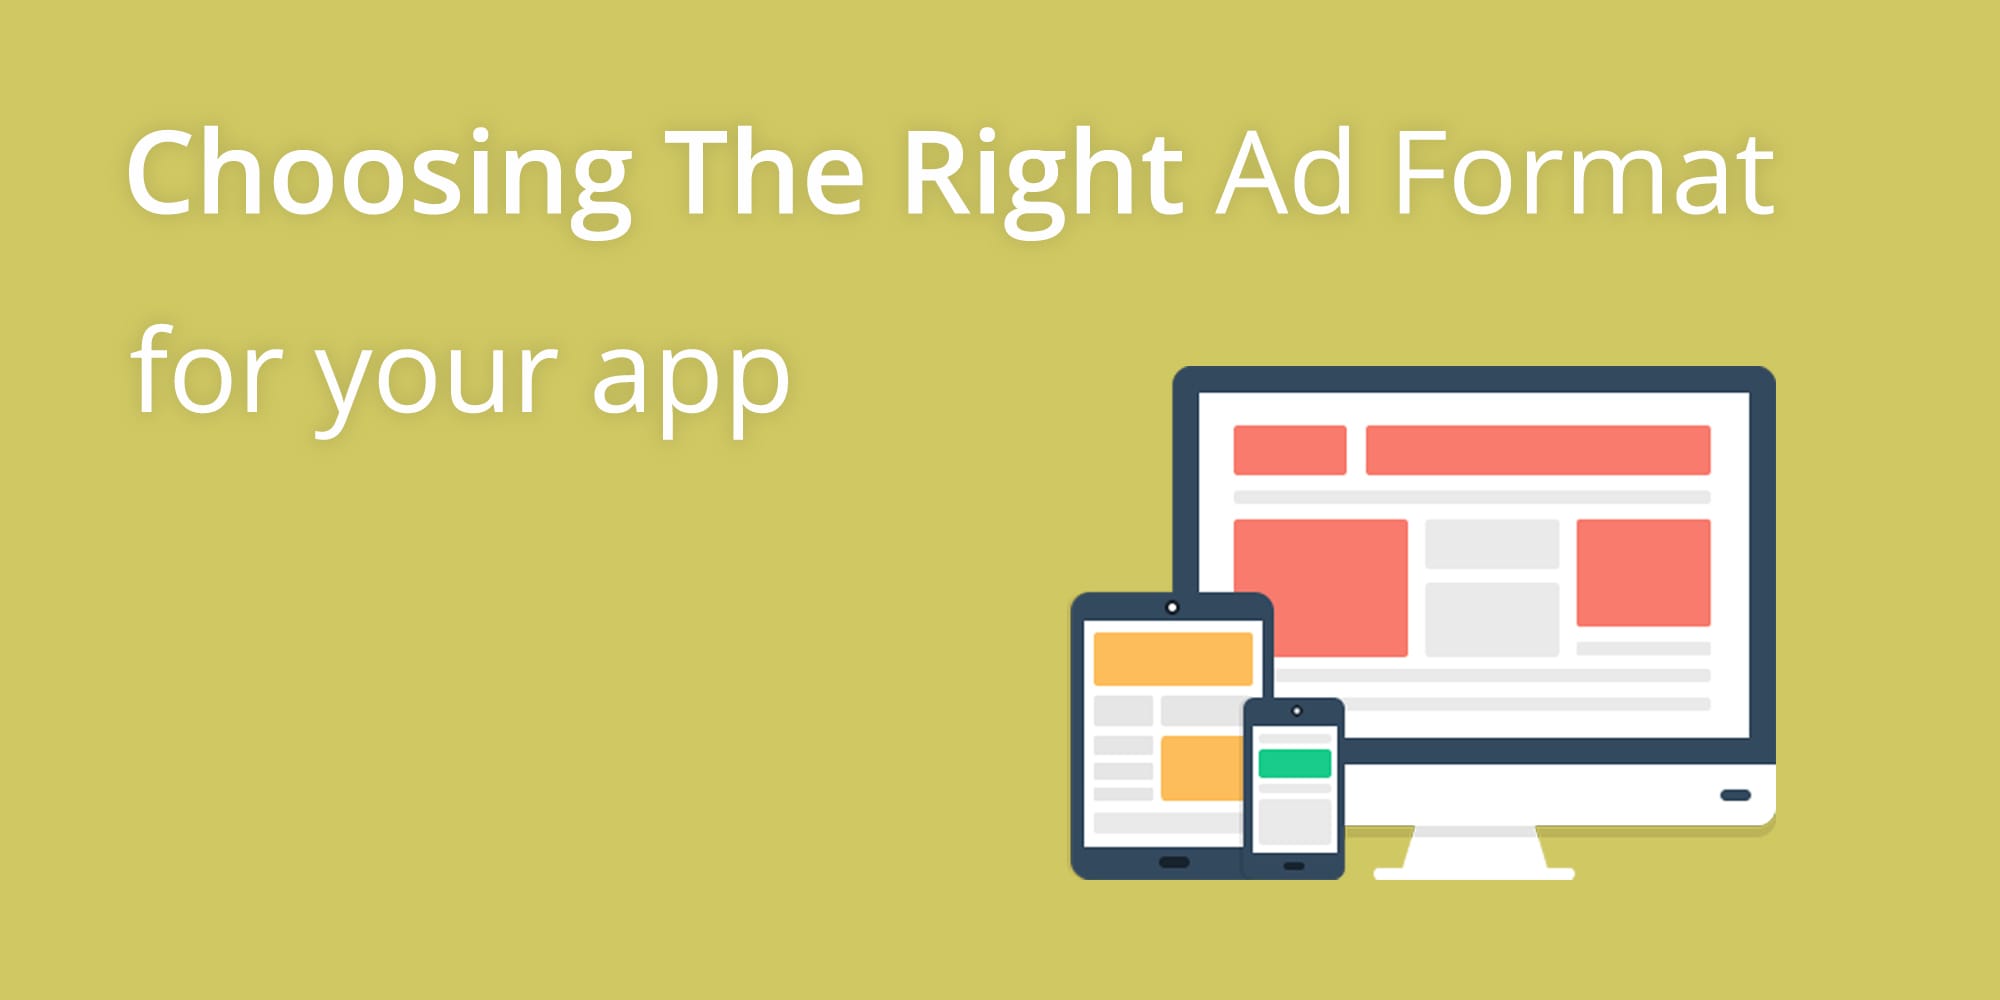 The one question you must answer before choosing the ad format for your mobile app